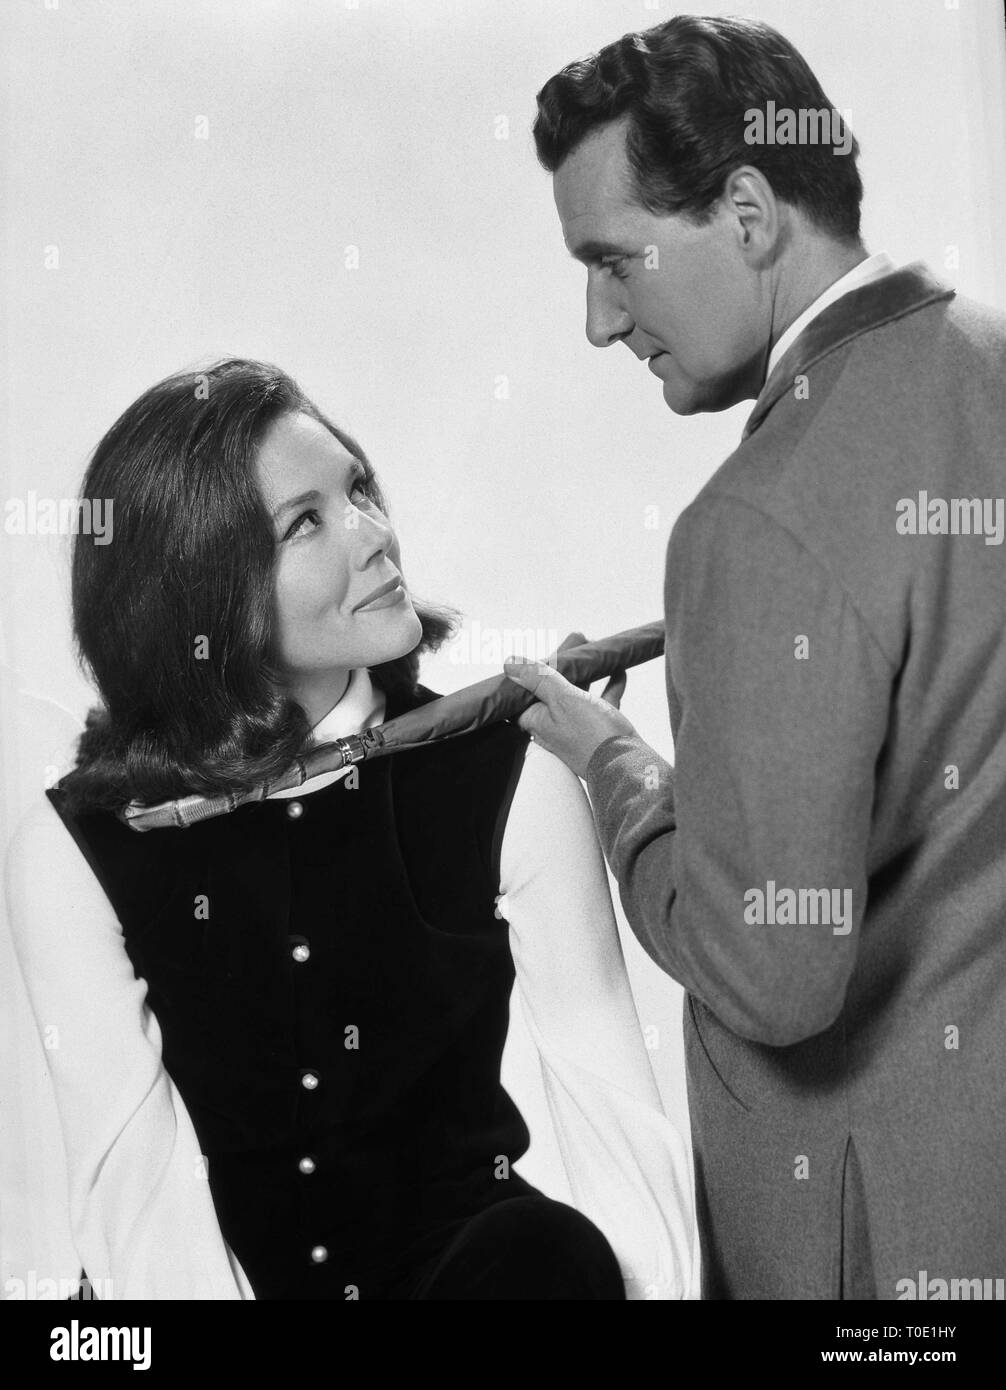 Patrick Macnee as John Steed Diana Rigg as Emma Peel THE AVENGERS 1965 ABC Weekend Television / Associated British Corporation Stock Photo